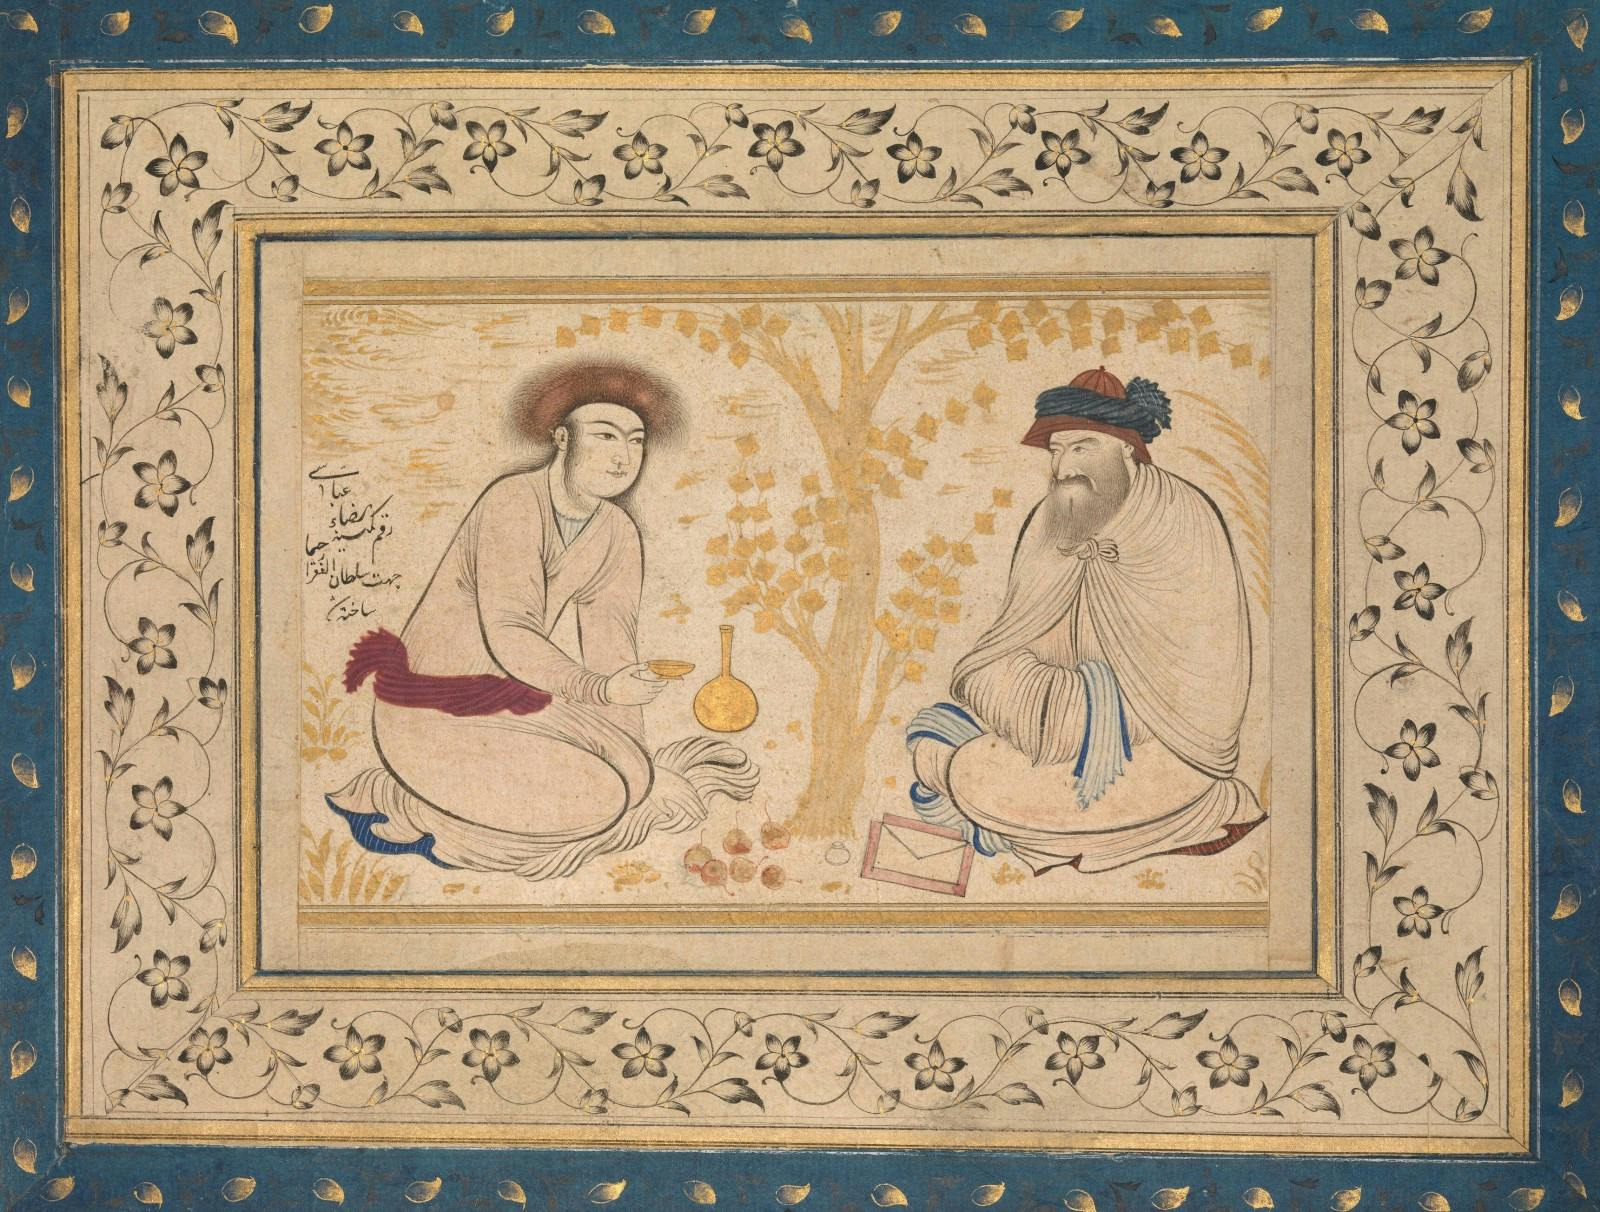 A painting of a youth and dervish from the early to mid 17th century (The MET Museum)